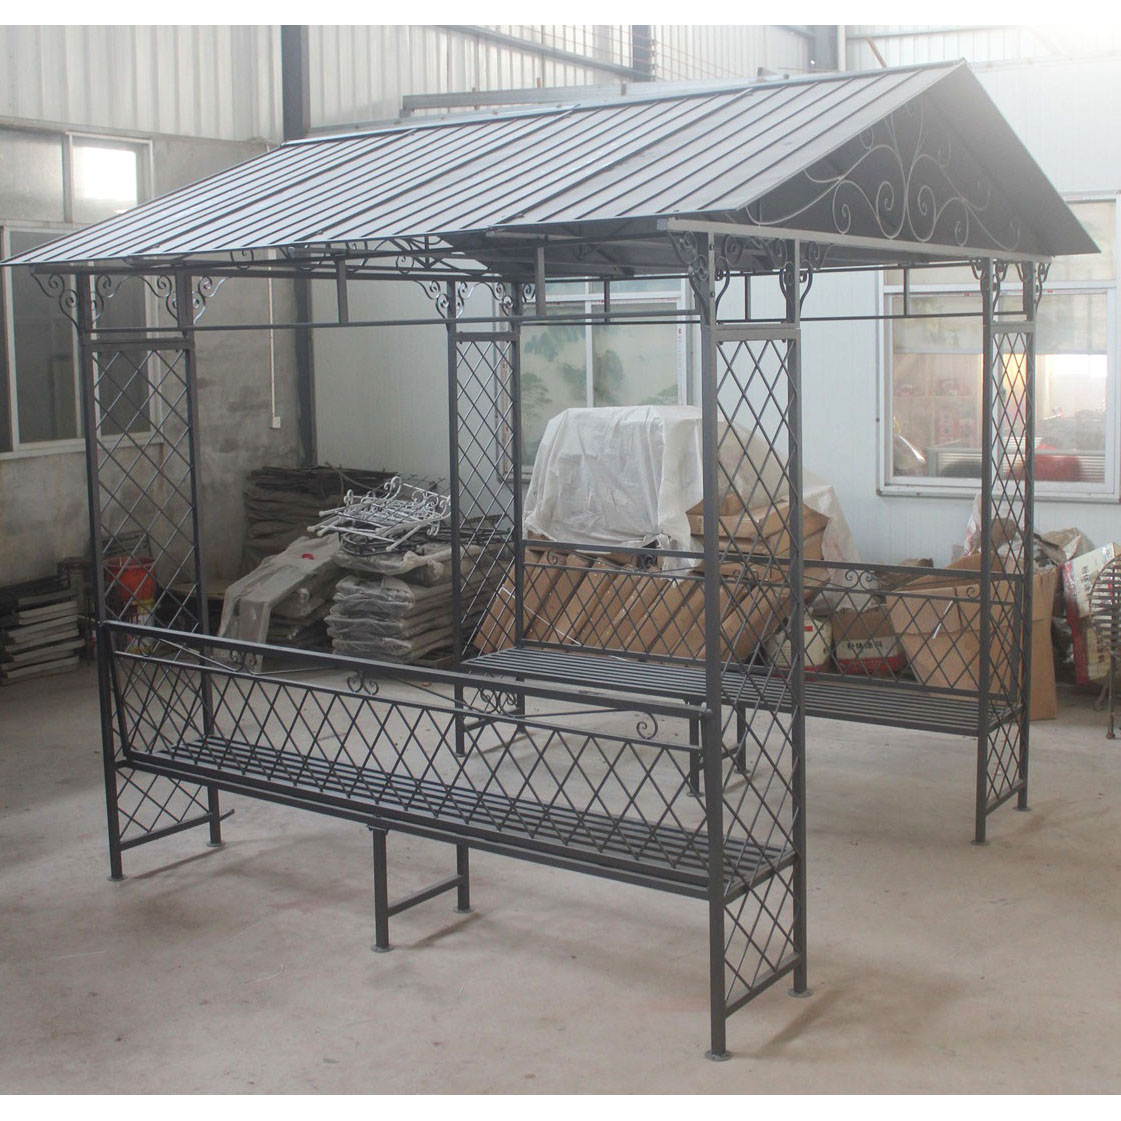 Square metal mongolian yurt with metal roof & benches